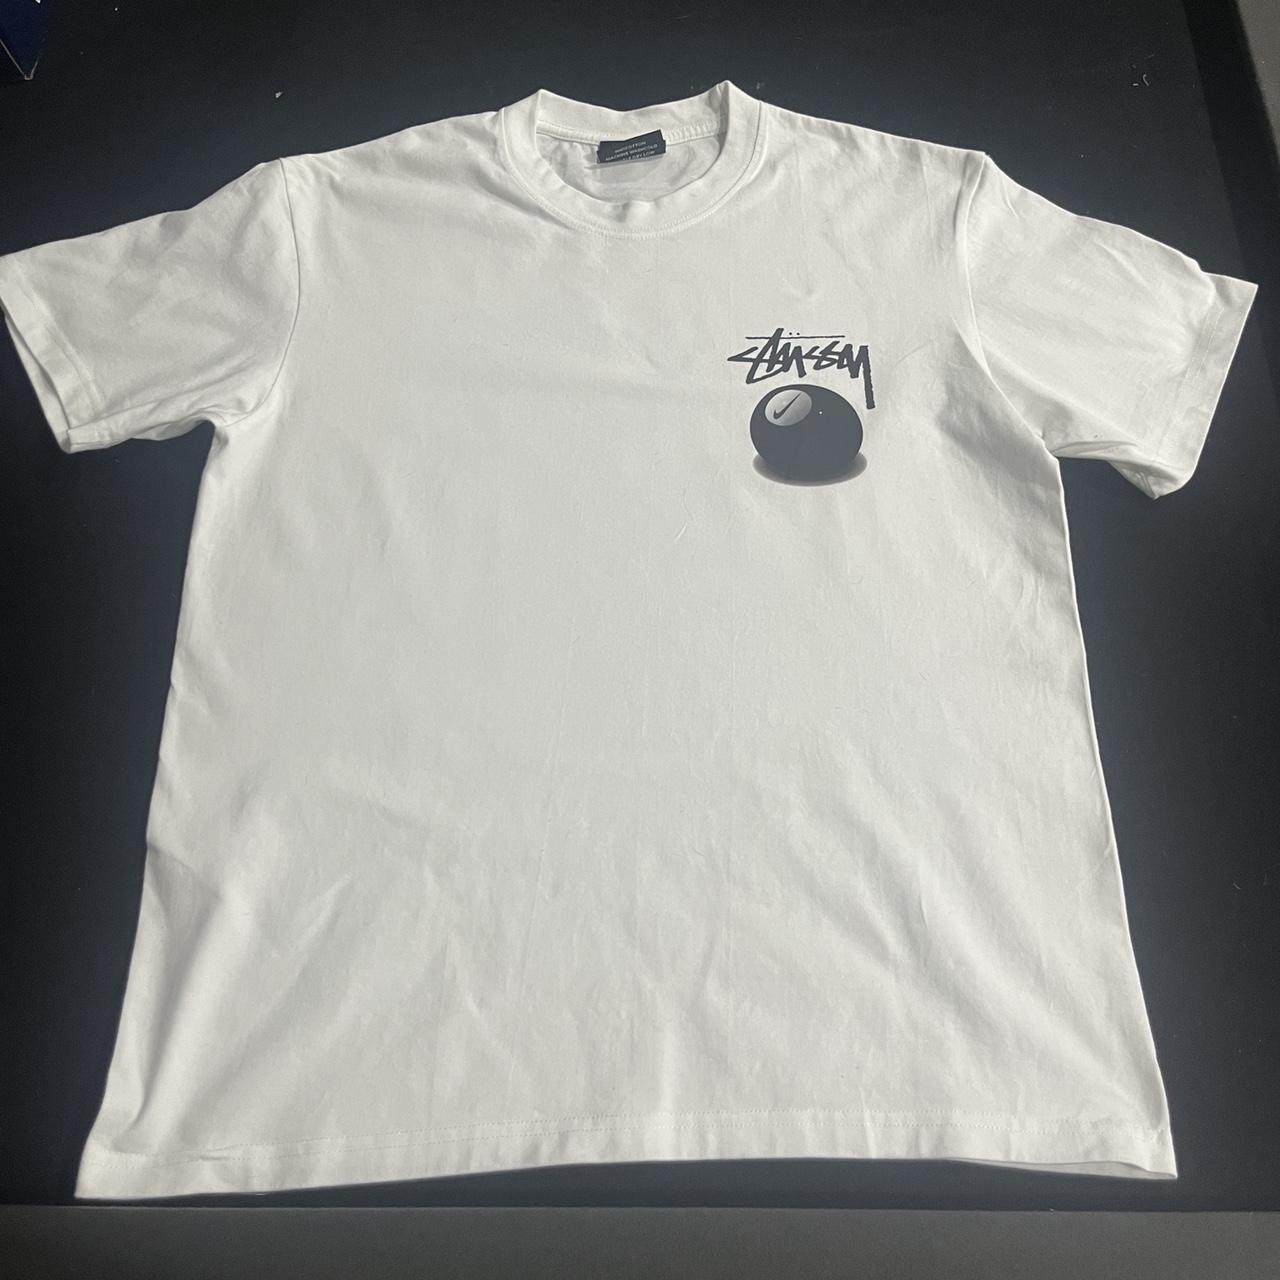 Nike and stussy 8 ball t shirt, size small only worn... - Depop